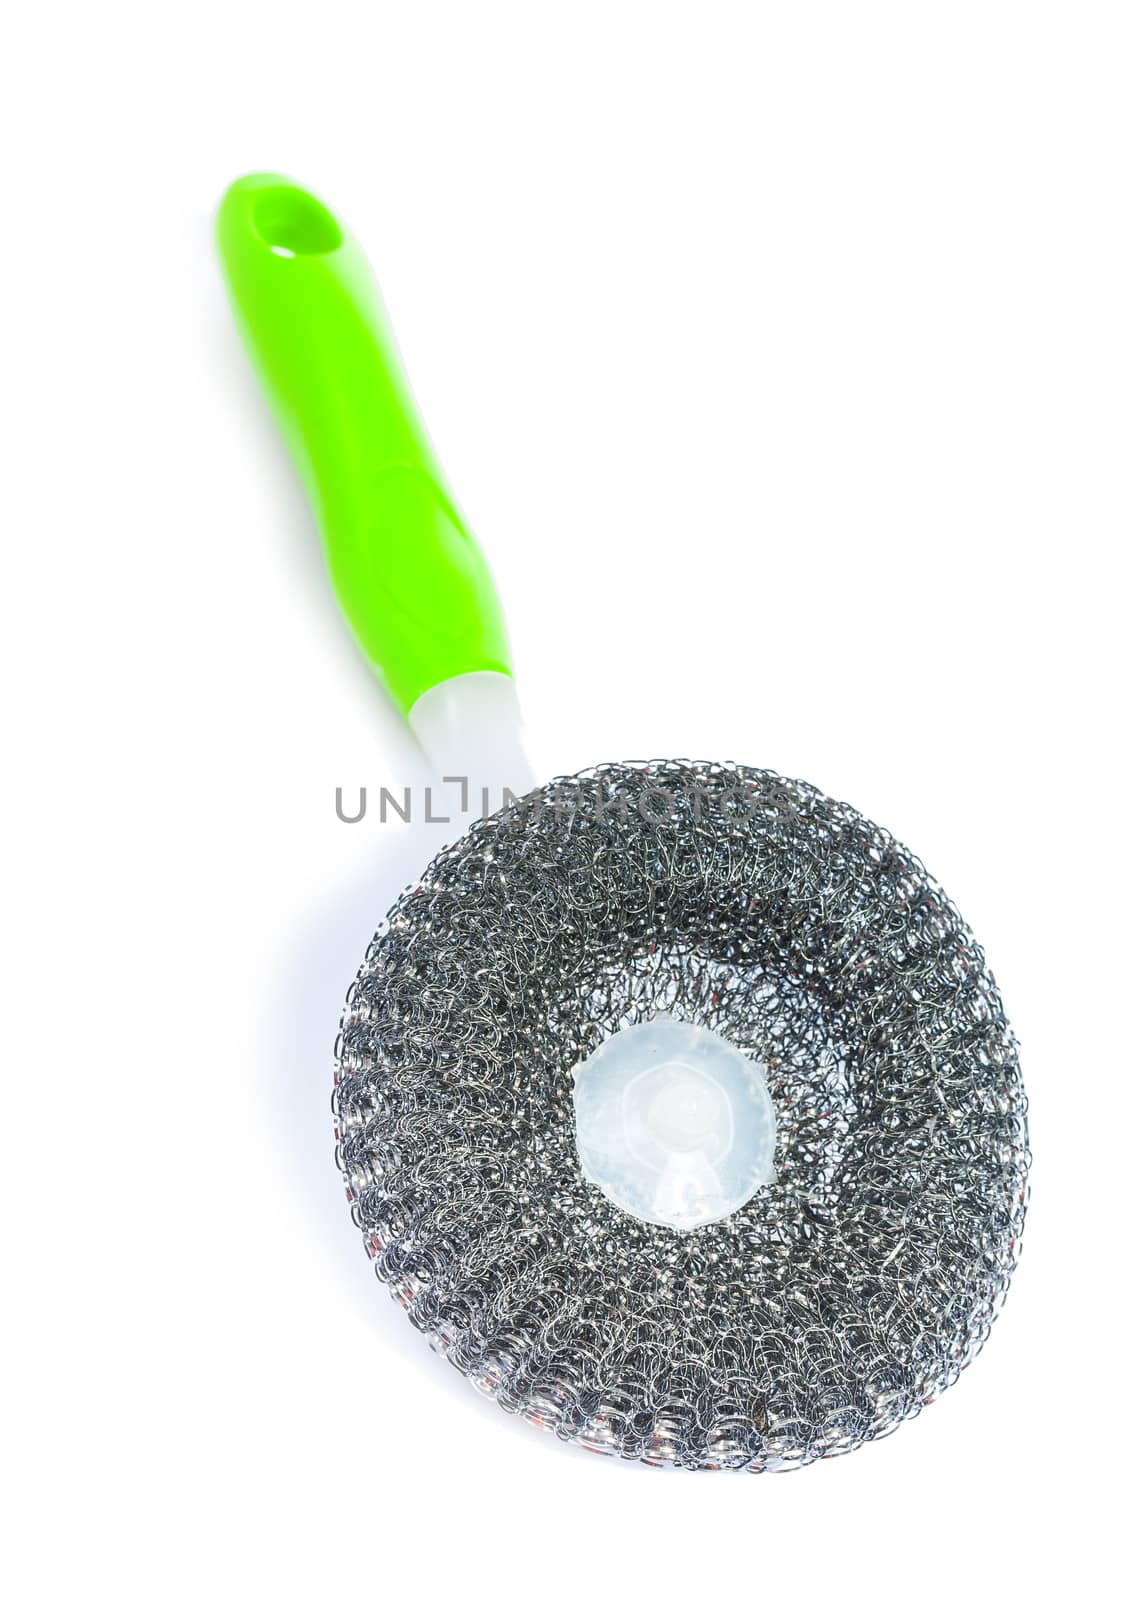 scrubbrush with green handle isolated on white